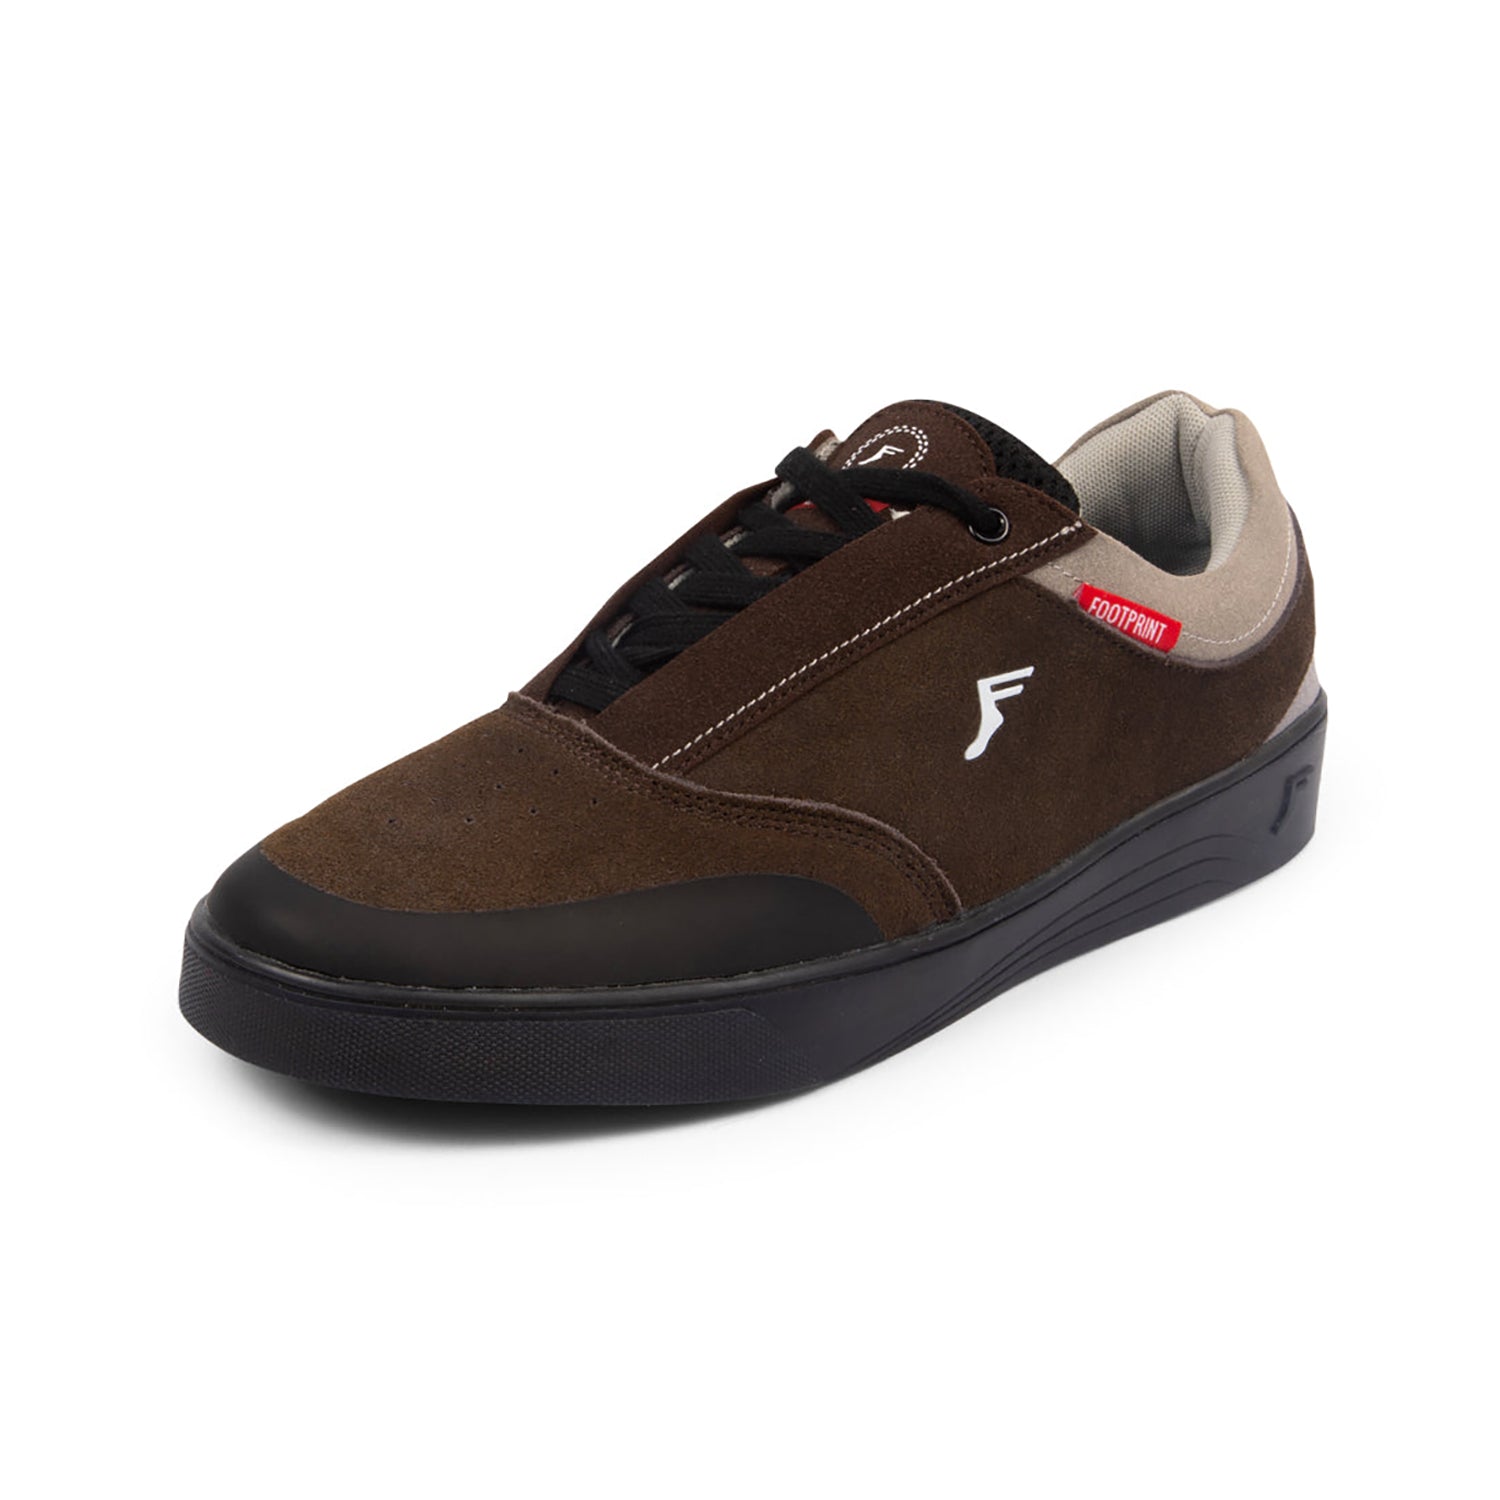 brown fp footprint shoes with black sole